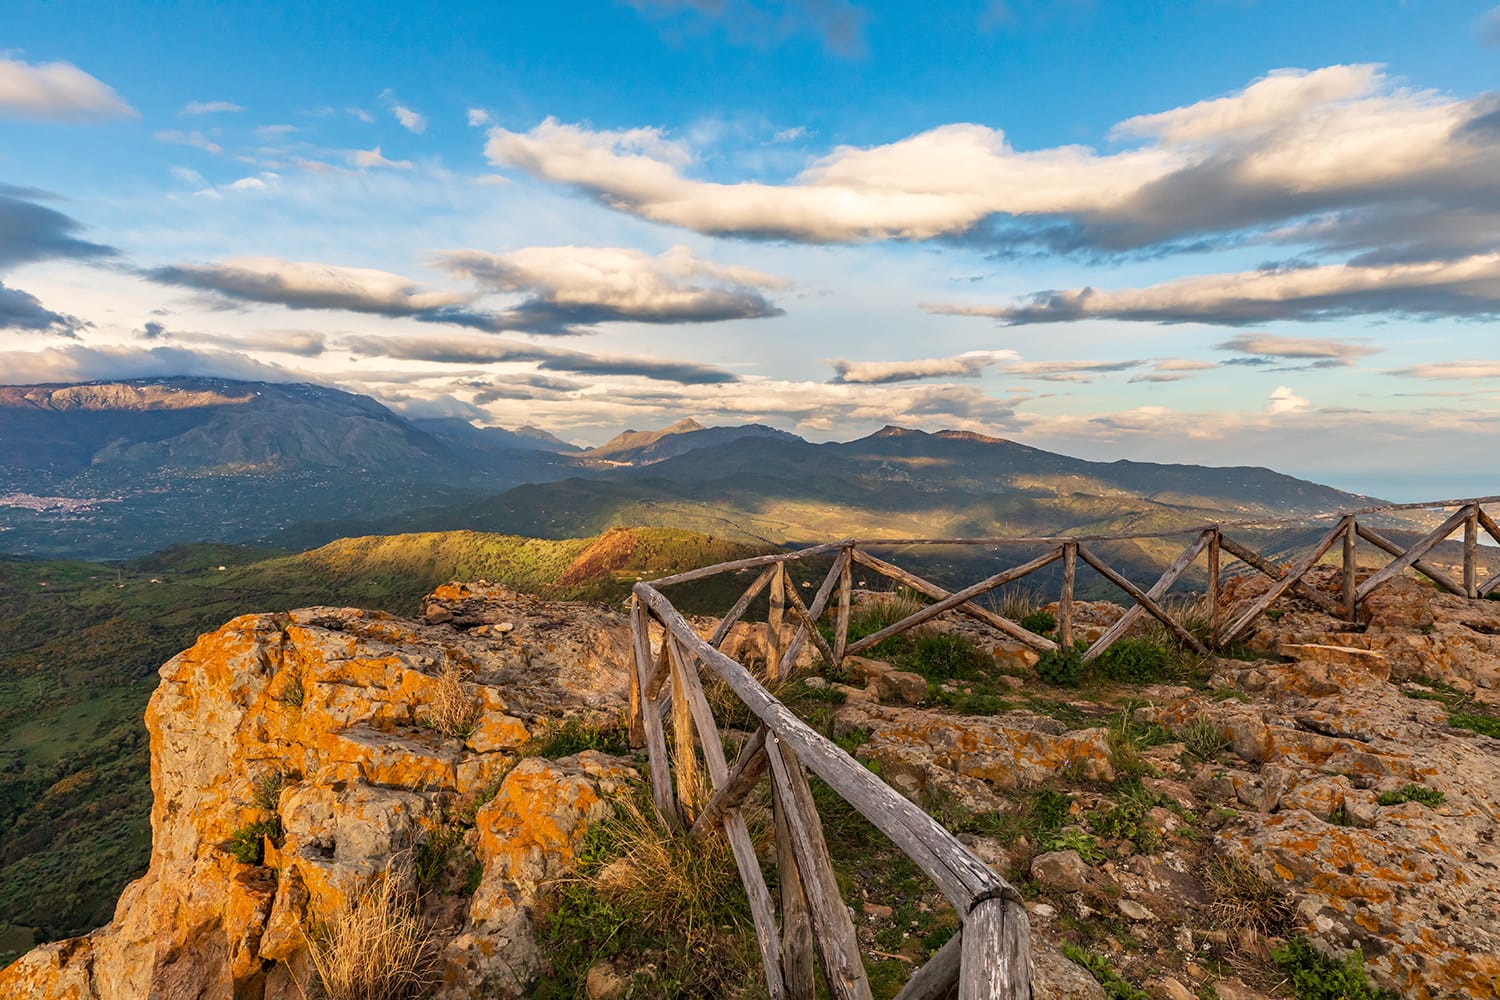 Italy, Sicily, Palermo Province, Pollina. View of the Madonie mountain range and Madonie Regional Natural Park, part of the UNESCO Global Geoparks Network.